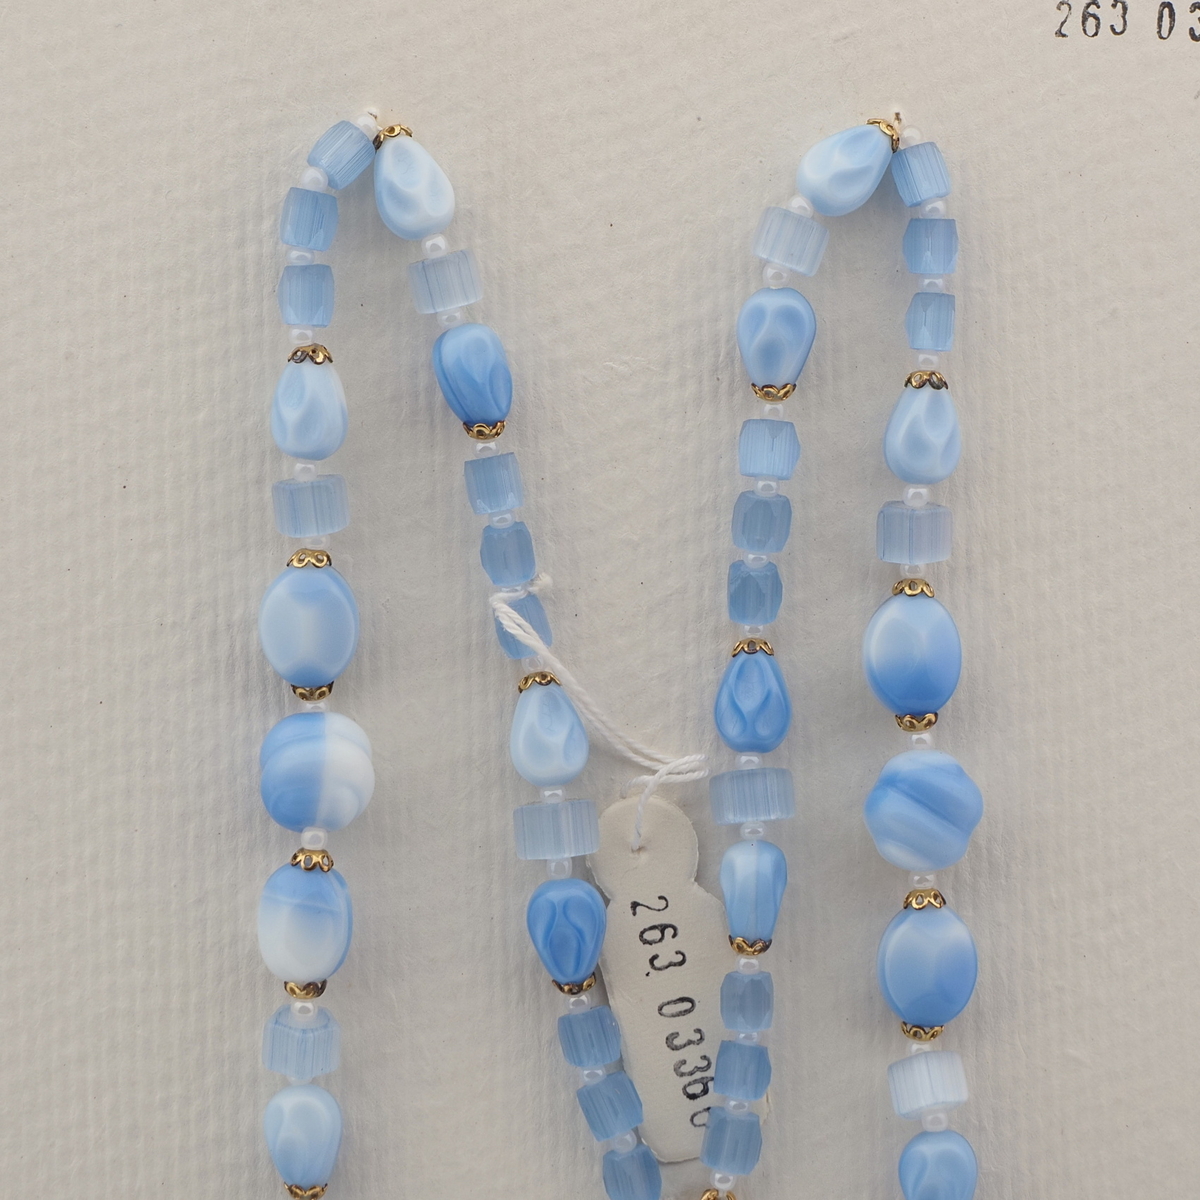 Iridescent Blue Glass Beads Necklace Set on Sale.